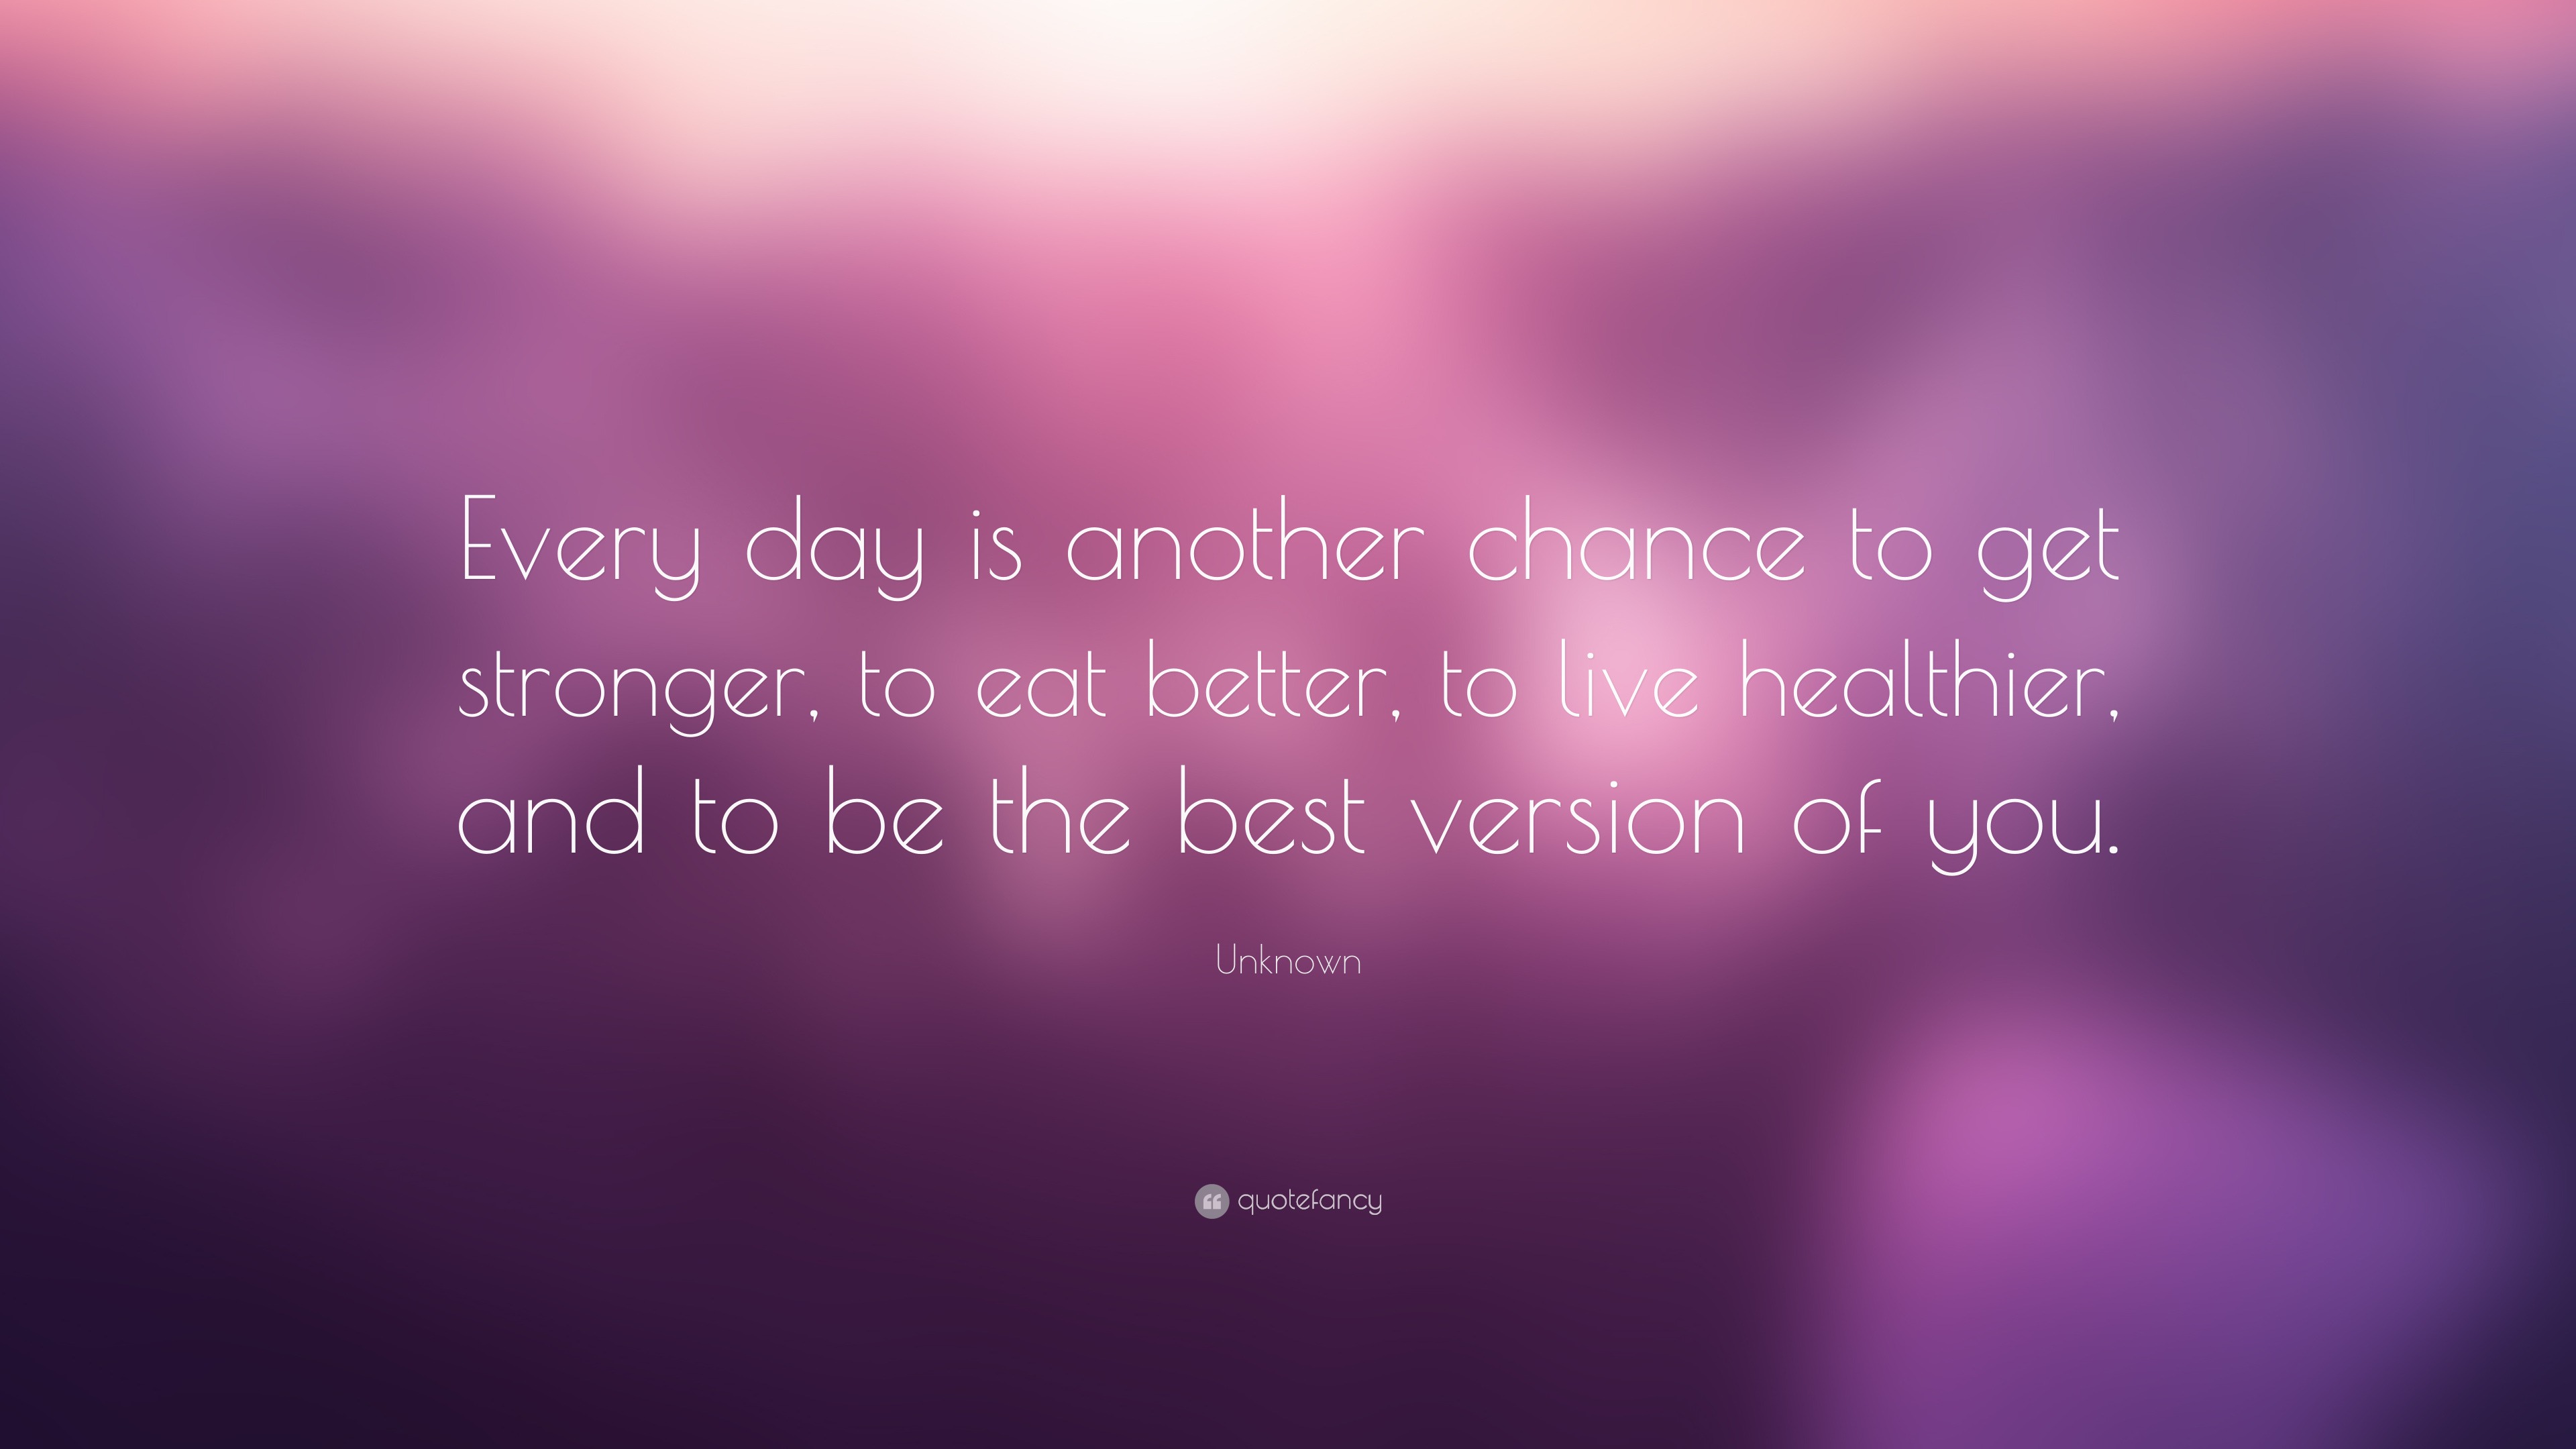 Unknown Quote: “Every day is another chance to get stronger, to eat ...